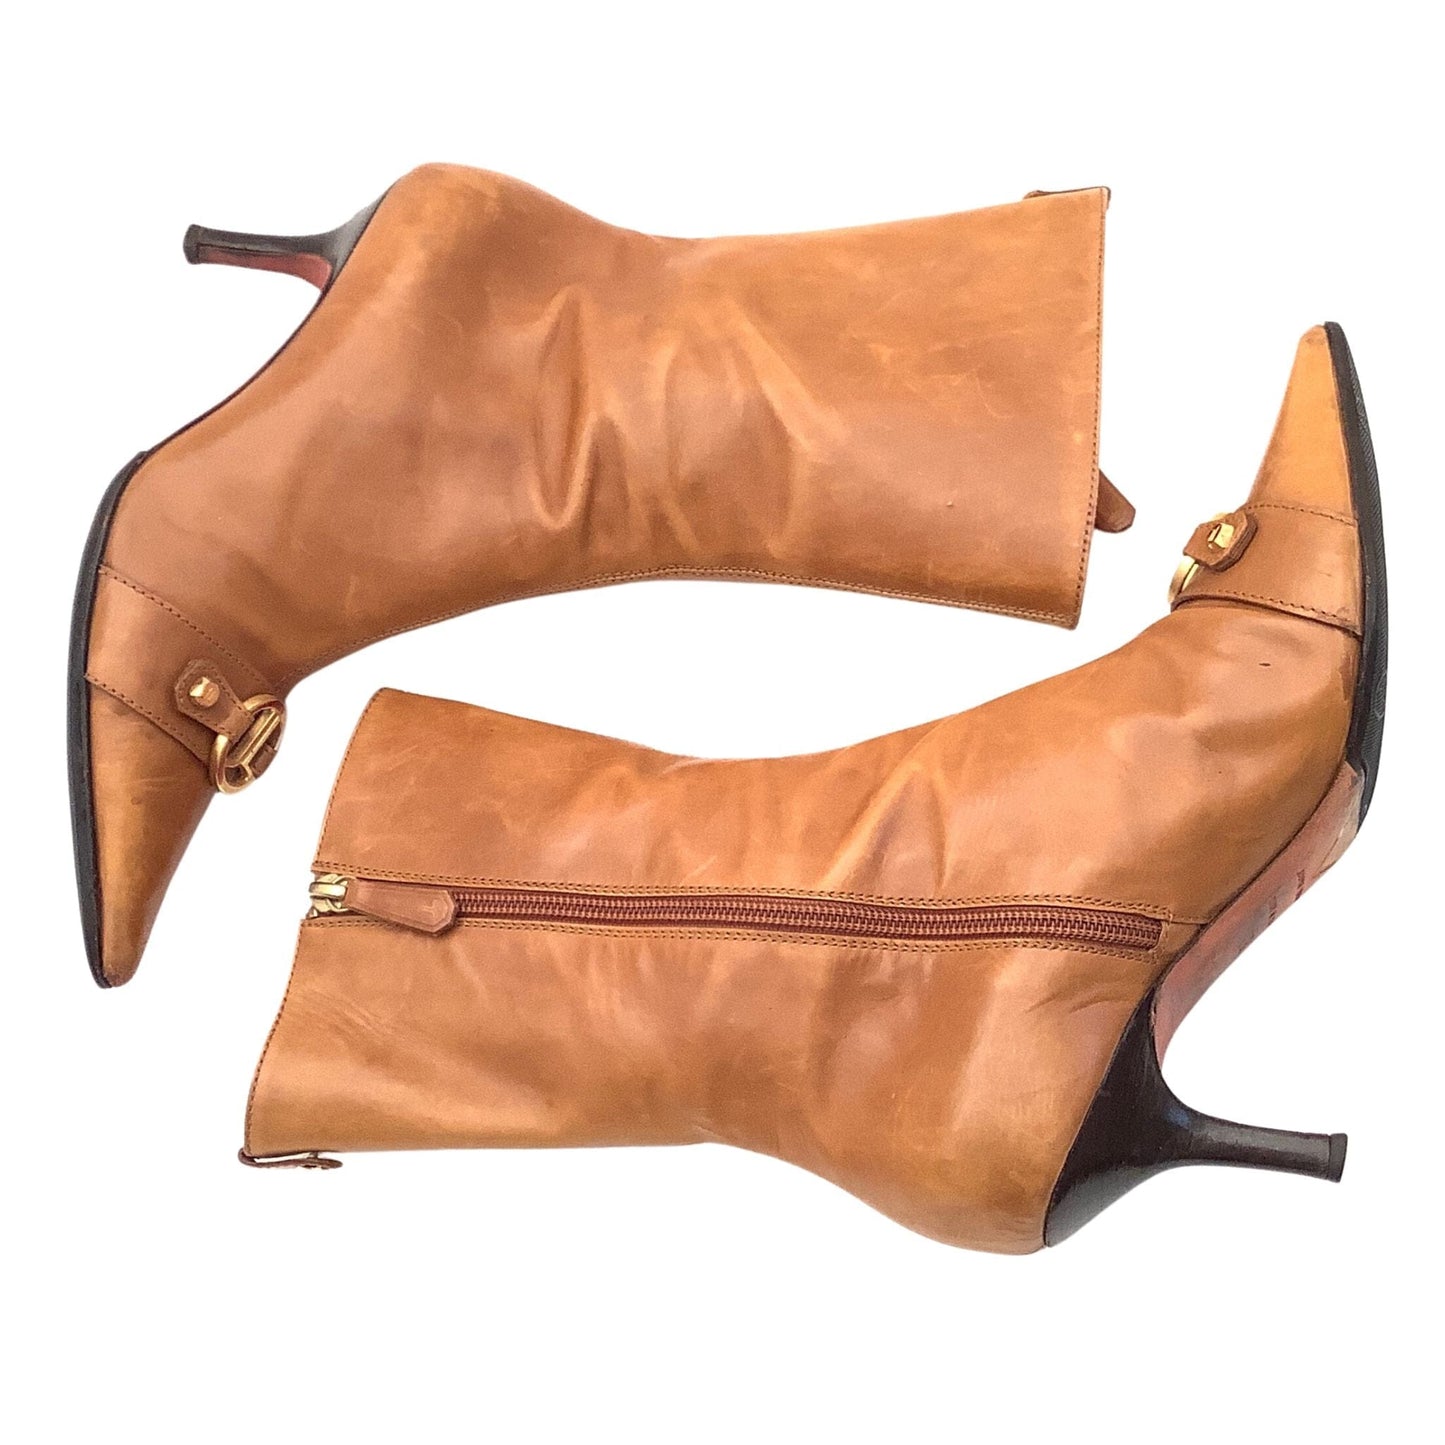 Judith Leiber Ankle Boots 7 / Tan / Y2K - Now